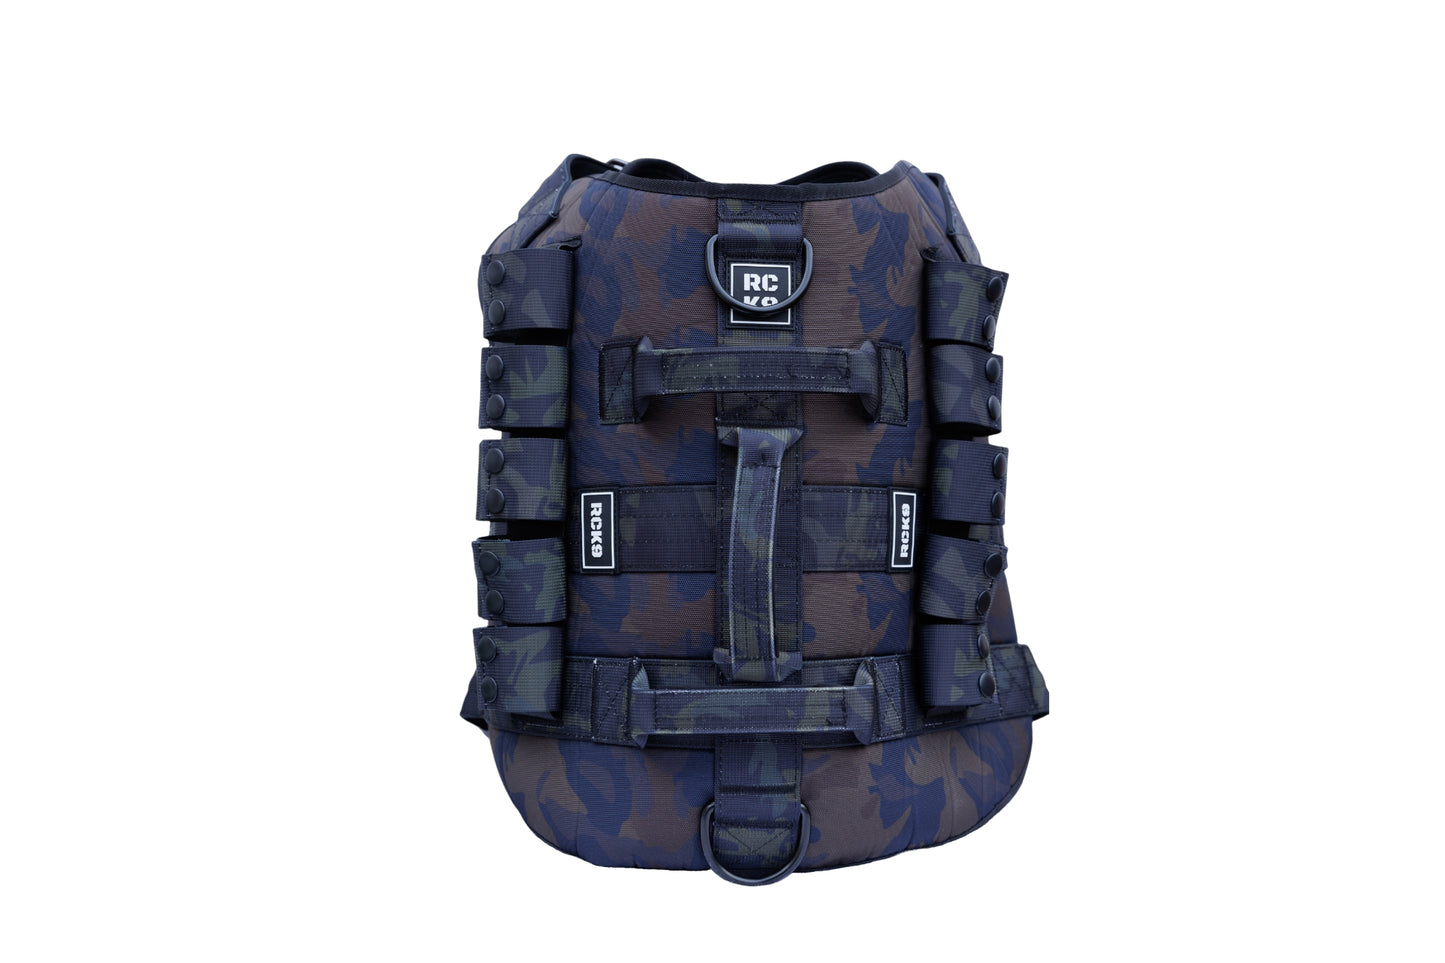 RCK9 Weighted Vest